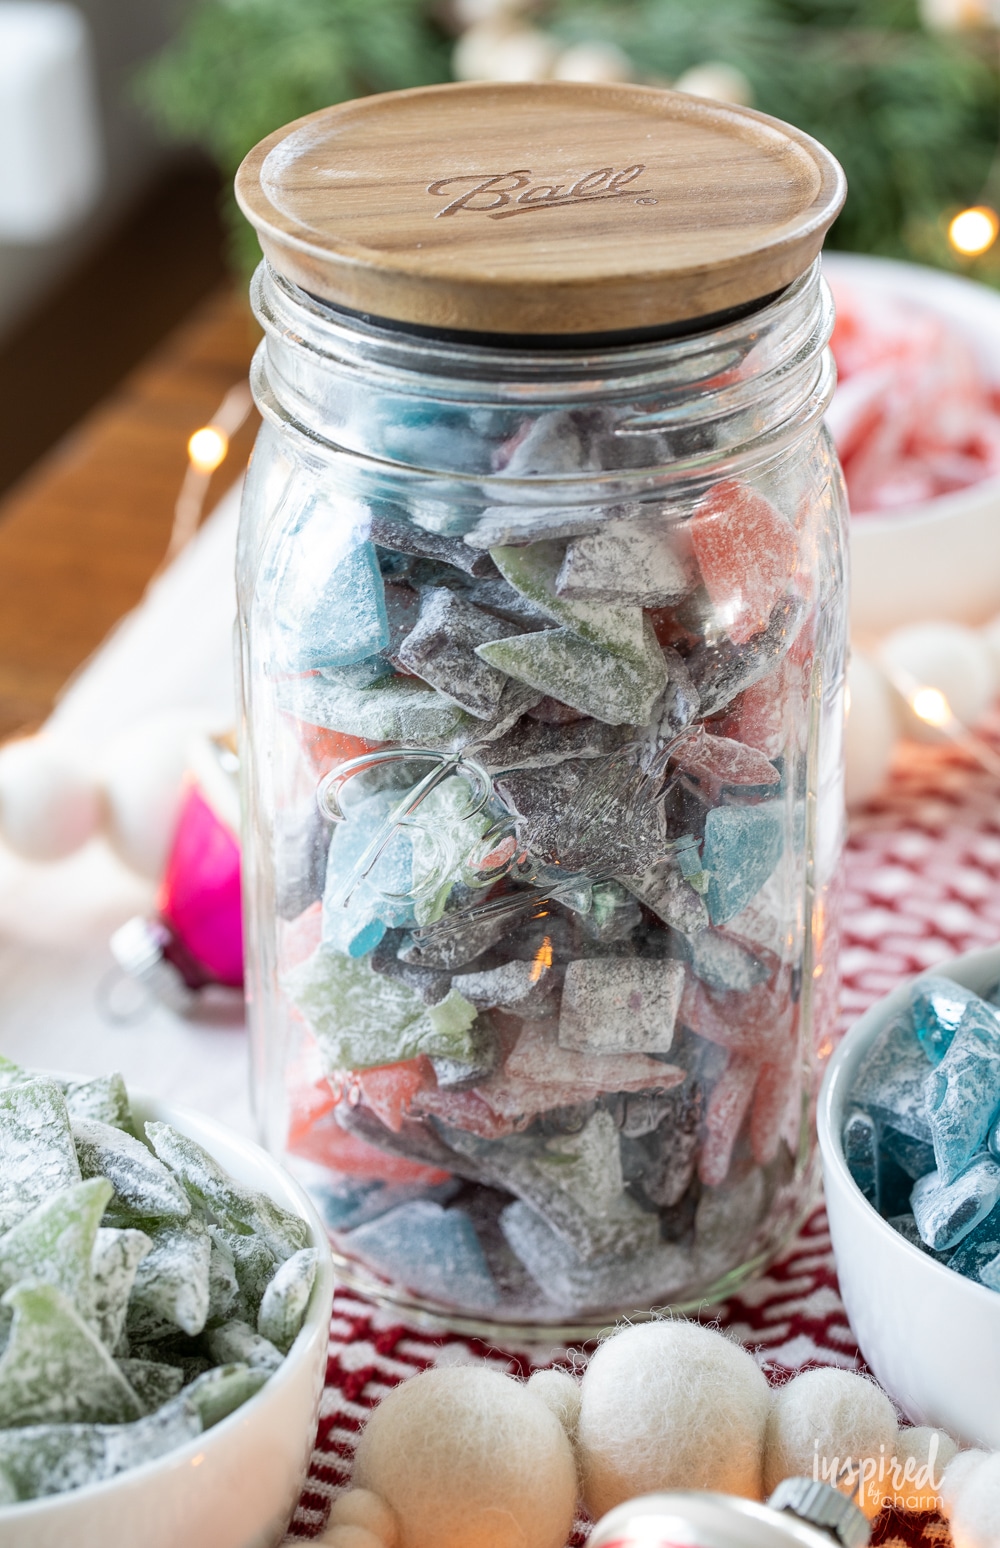 Aunt Maggie's Hard Tack Candy Recipe